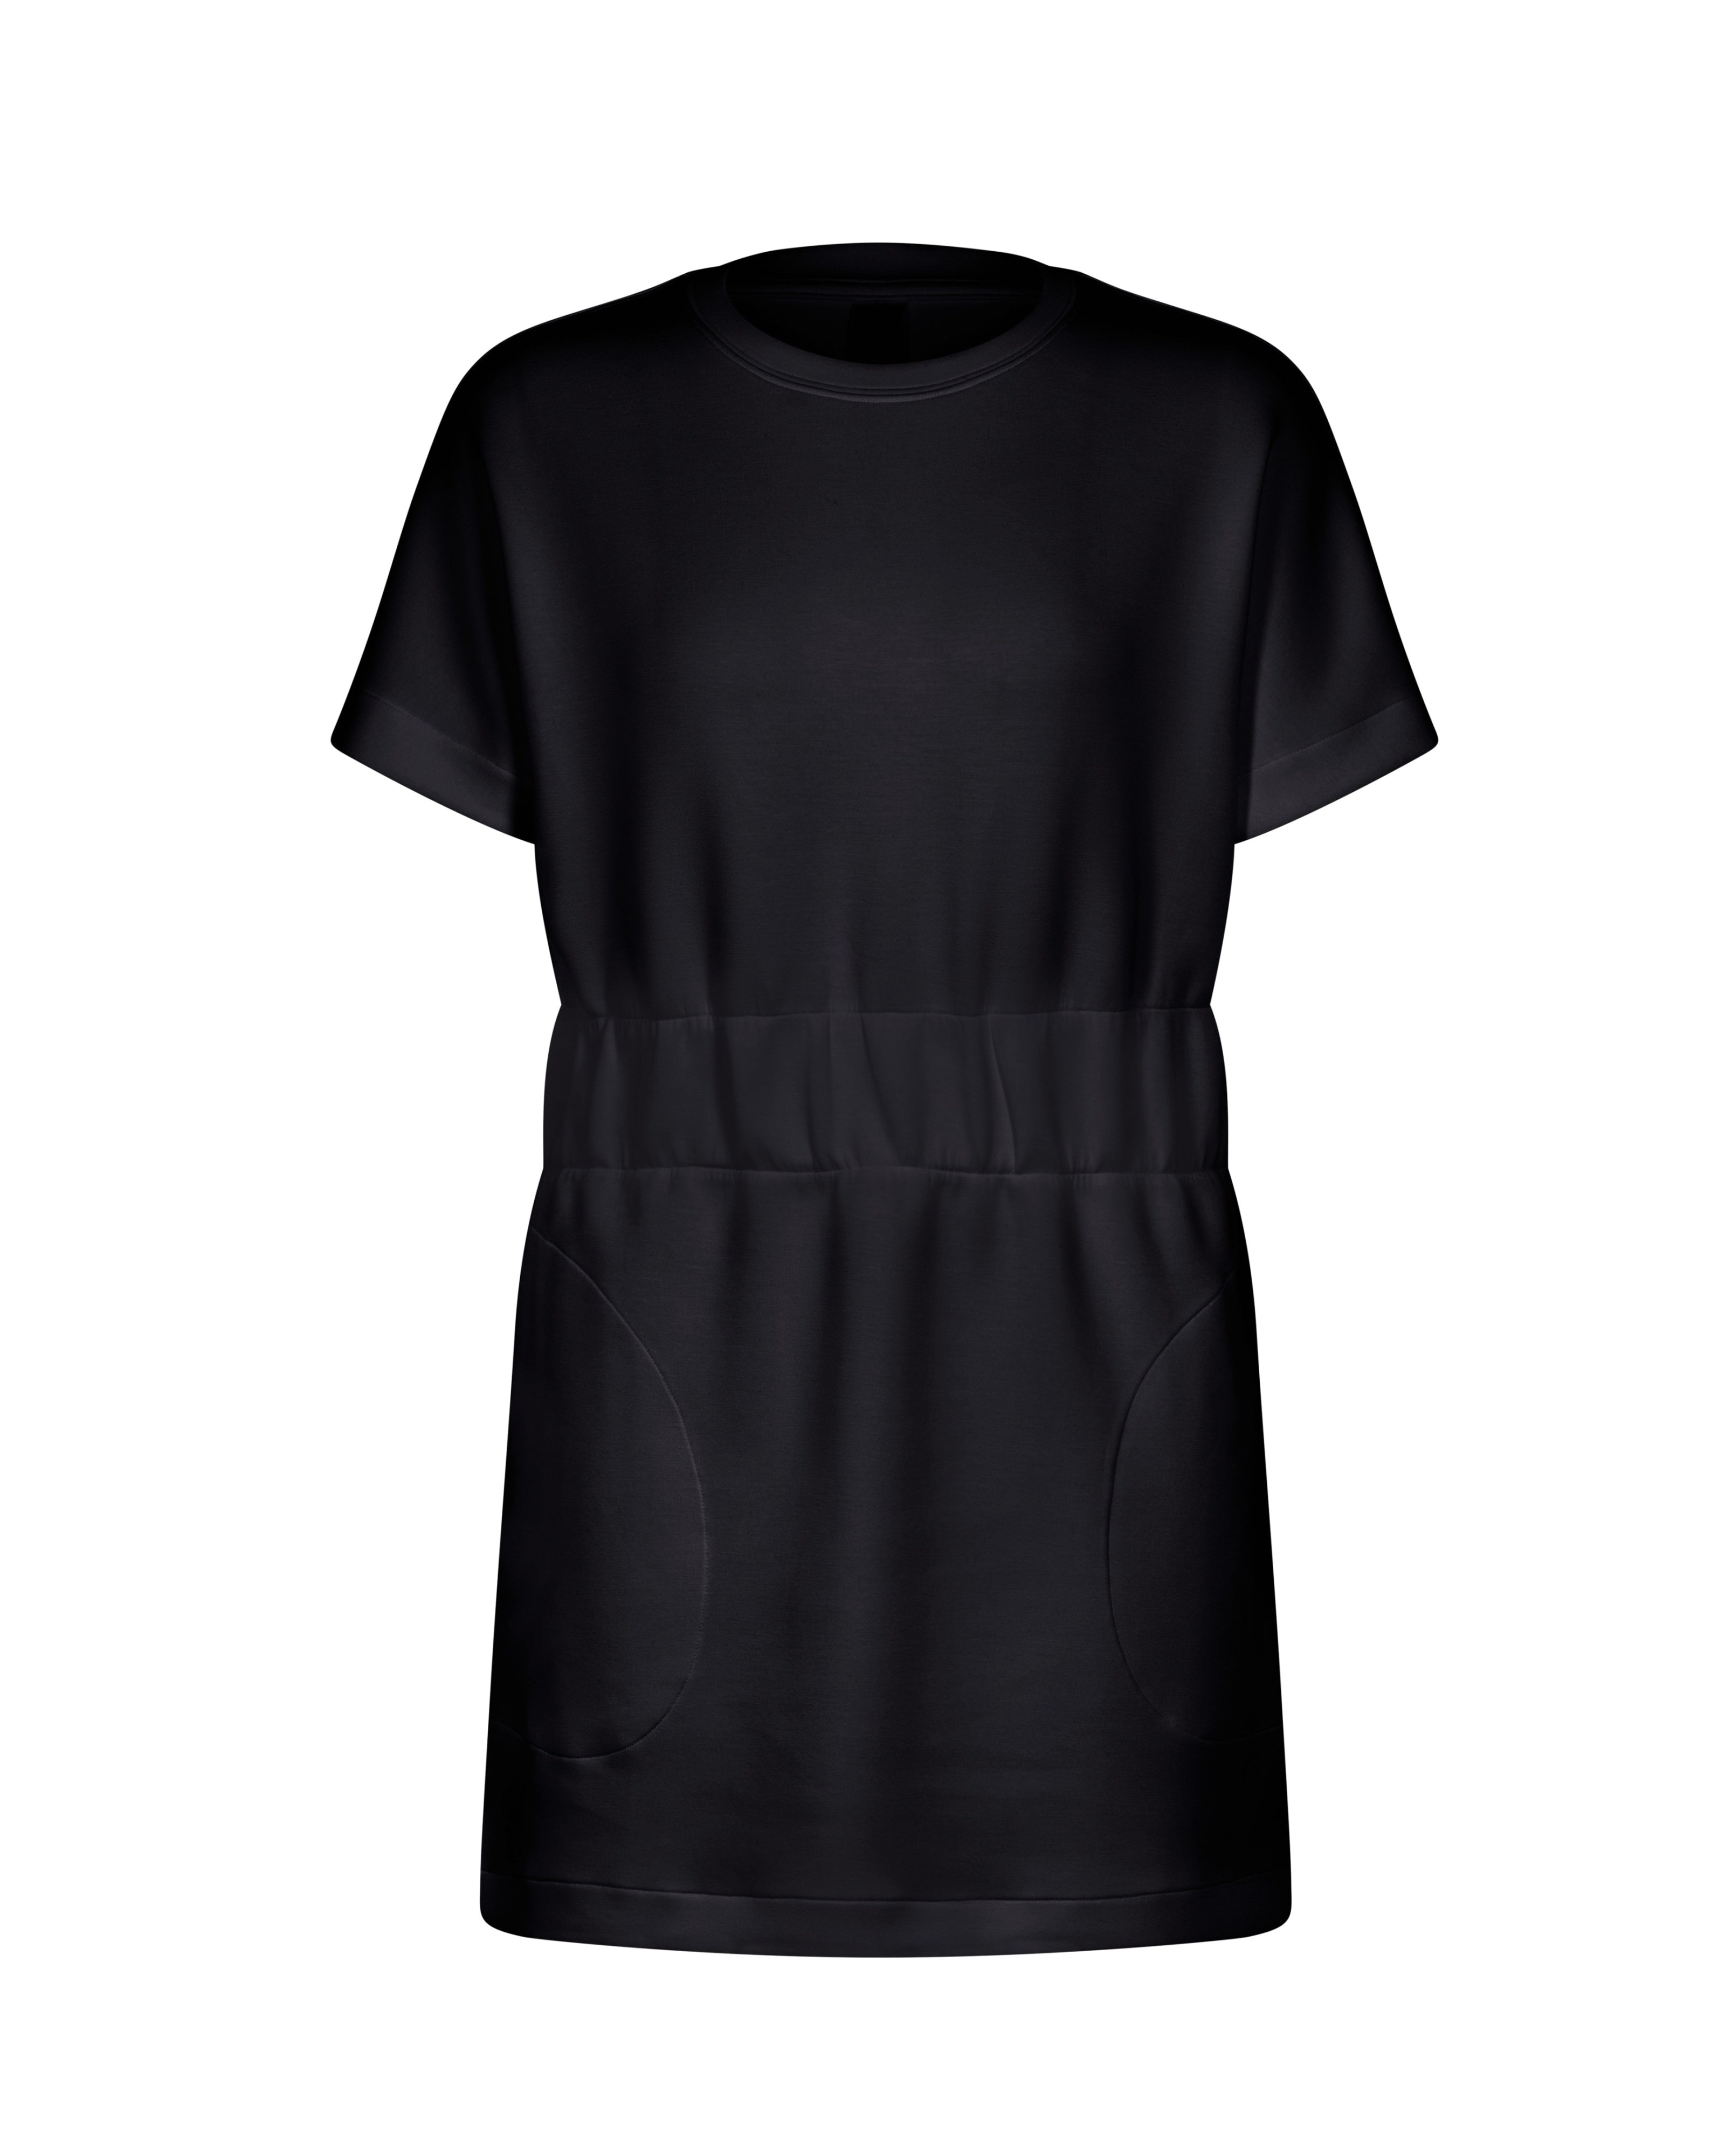 Spanx Airessentials Clinched Tee Shirt Dress | Very Black